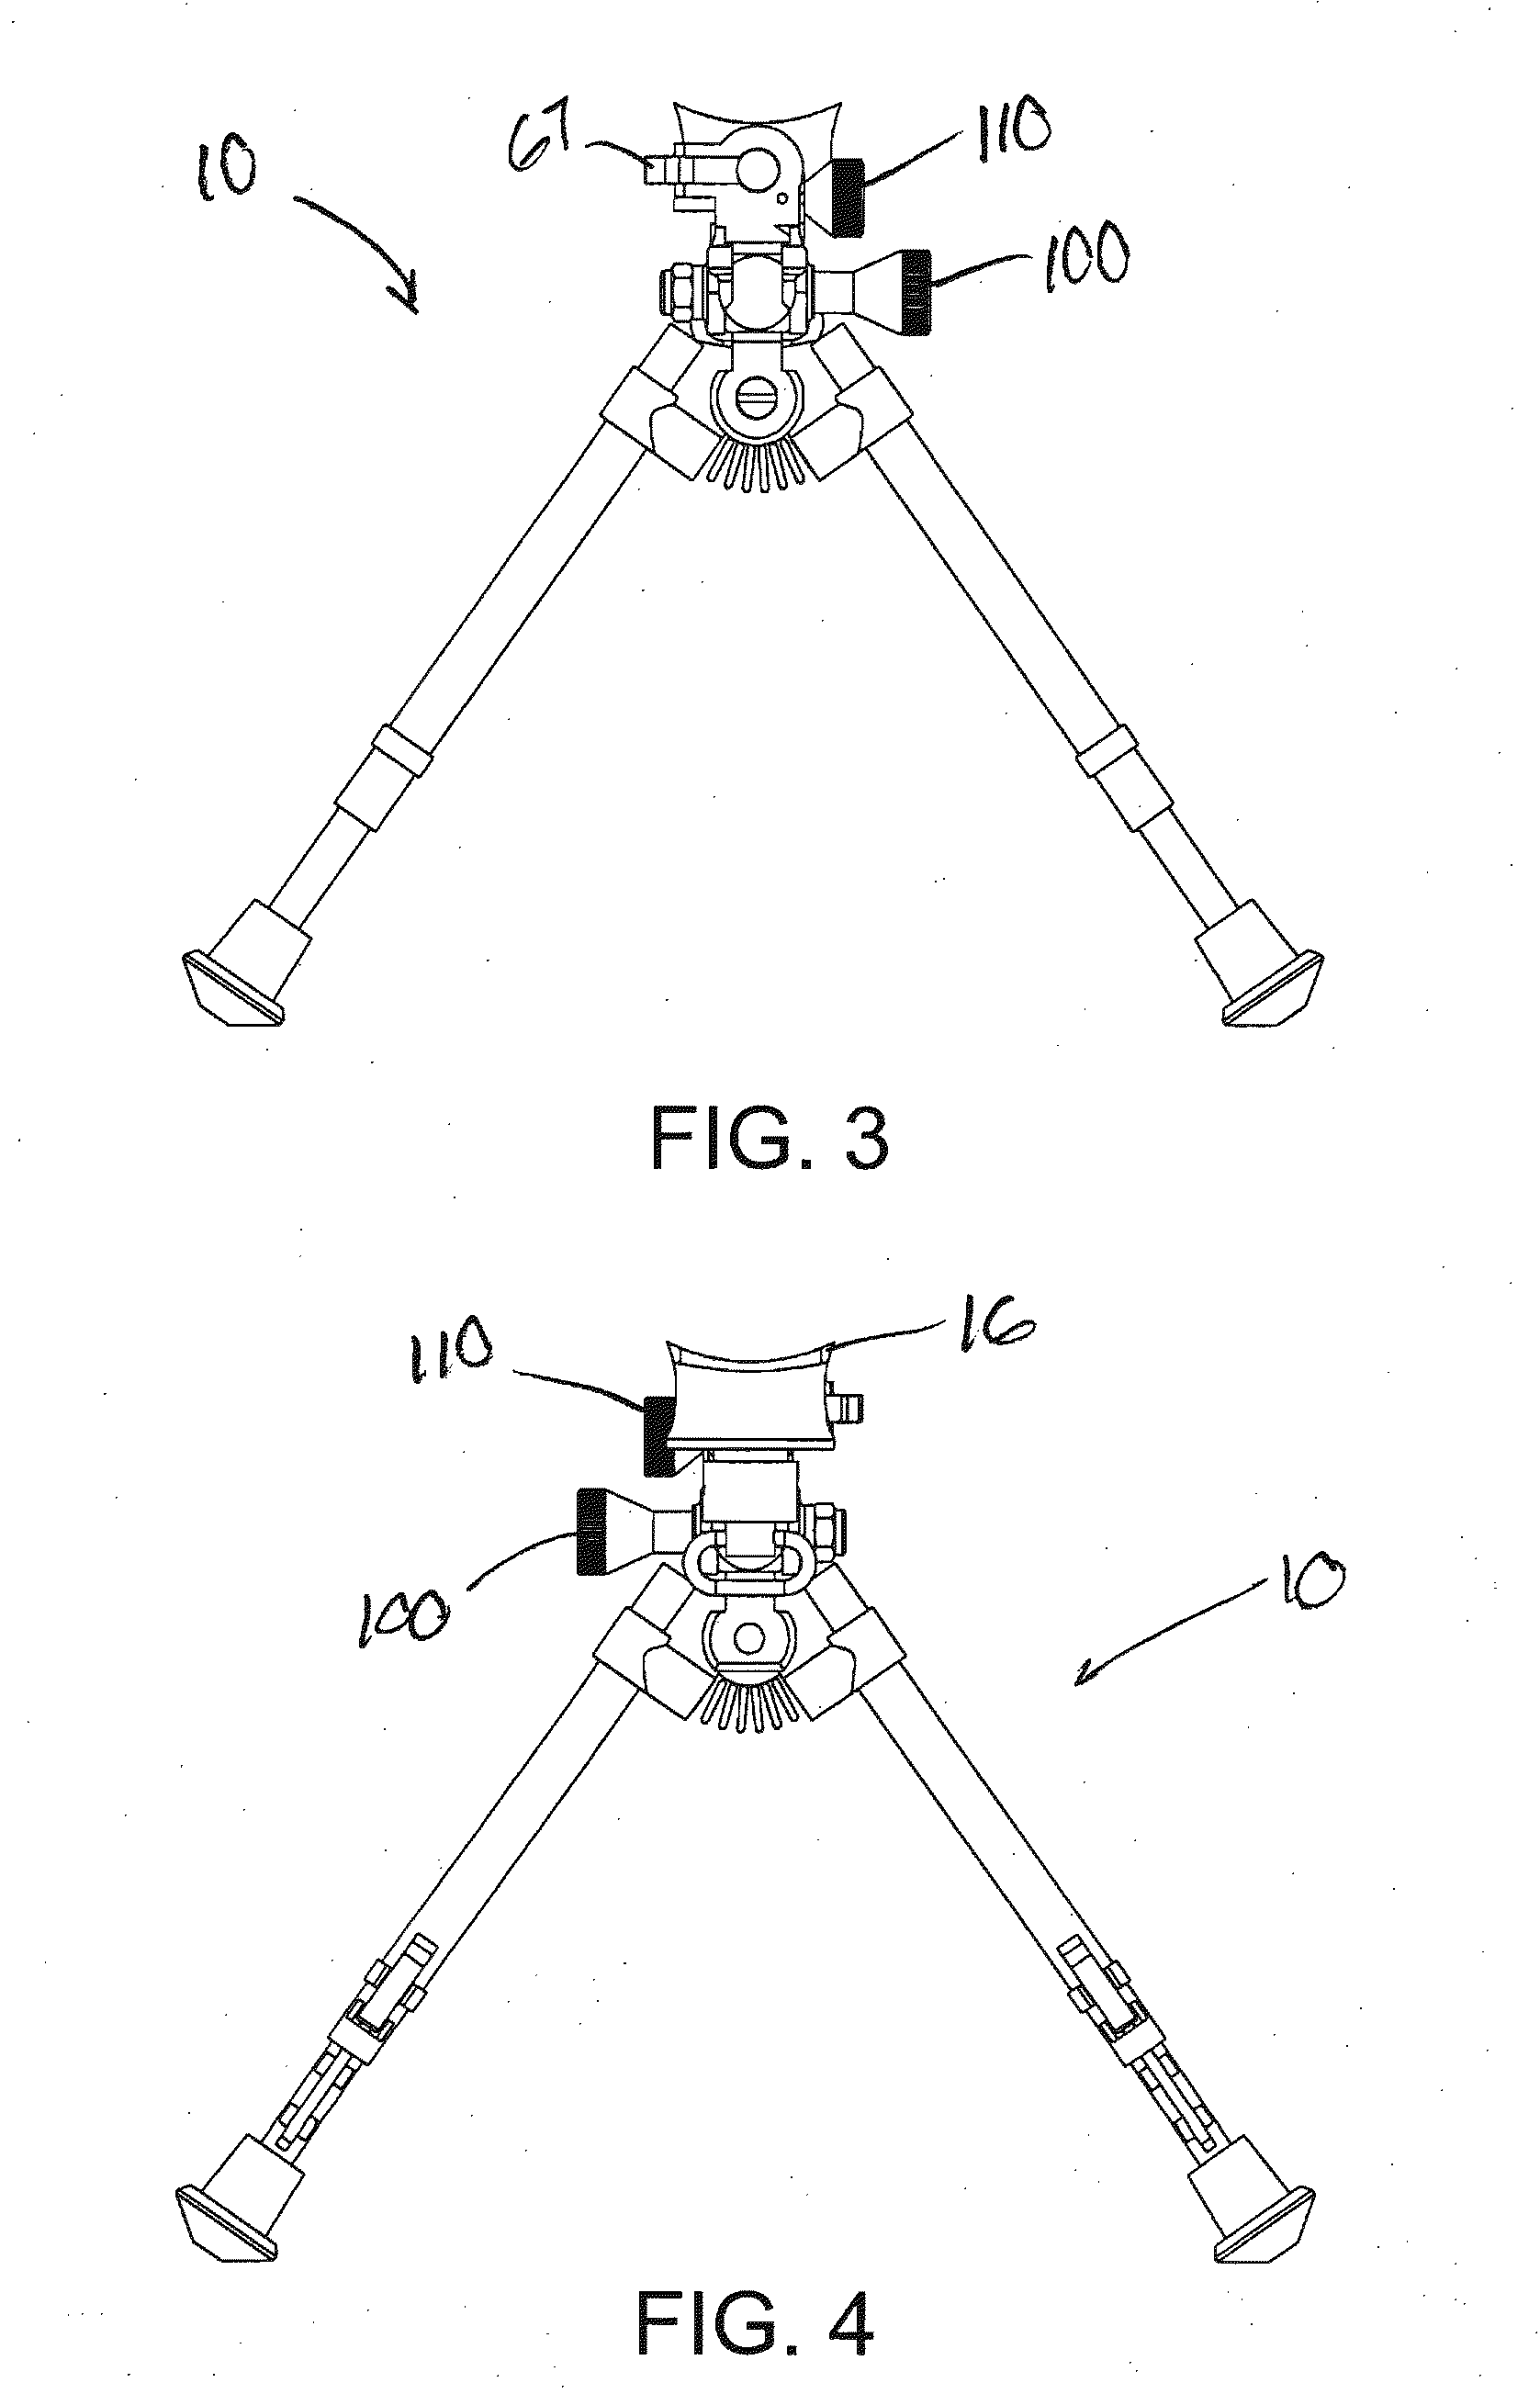 Method for Quick Disconnect Bipod Mount Assembly with adjustable and lockable Tilt, Pan and Cant Controls